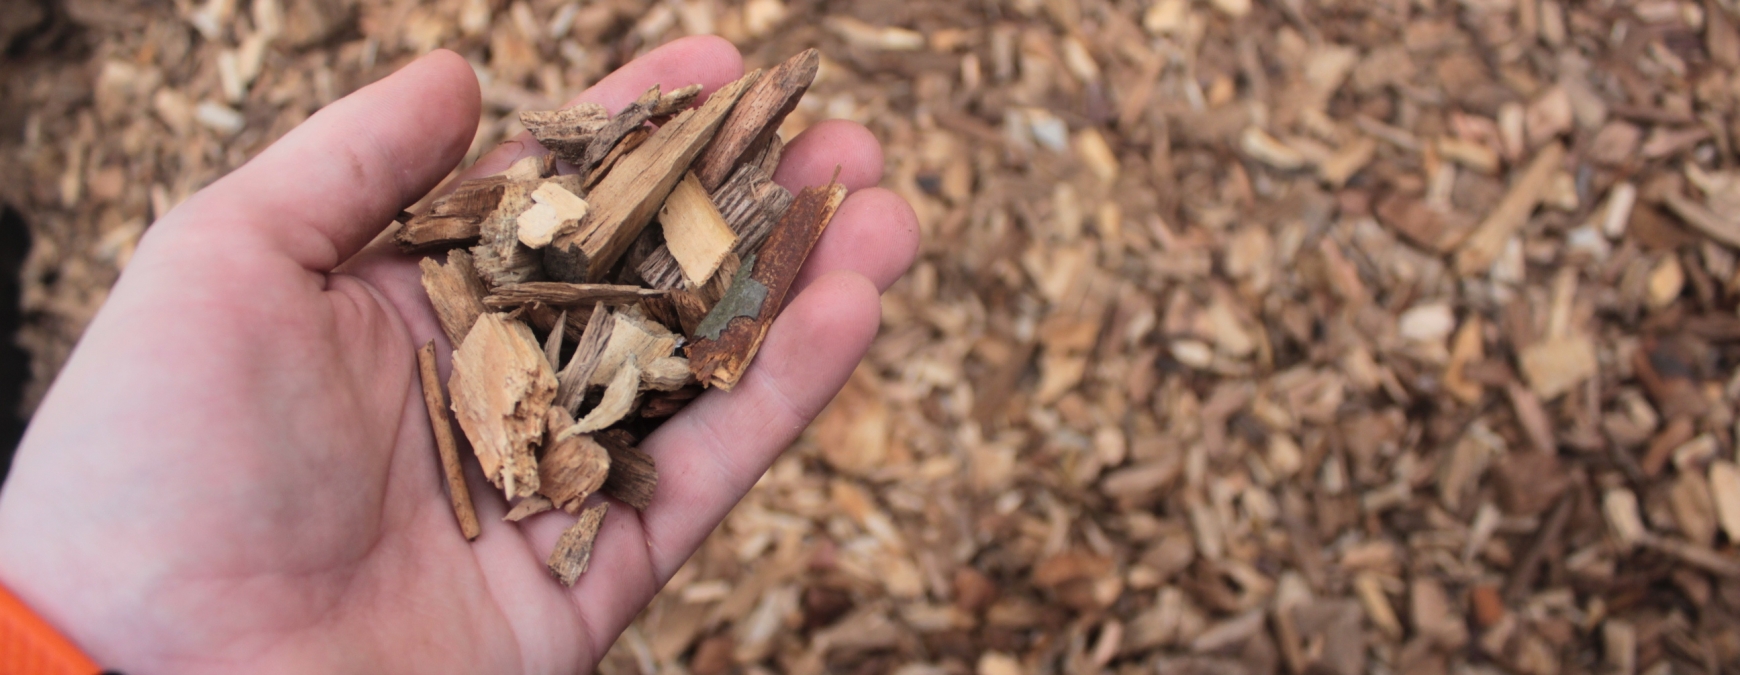 Woodchip in a hand with more in the background